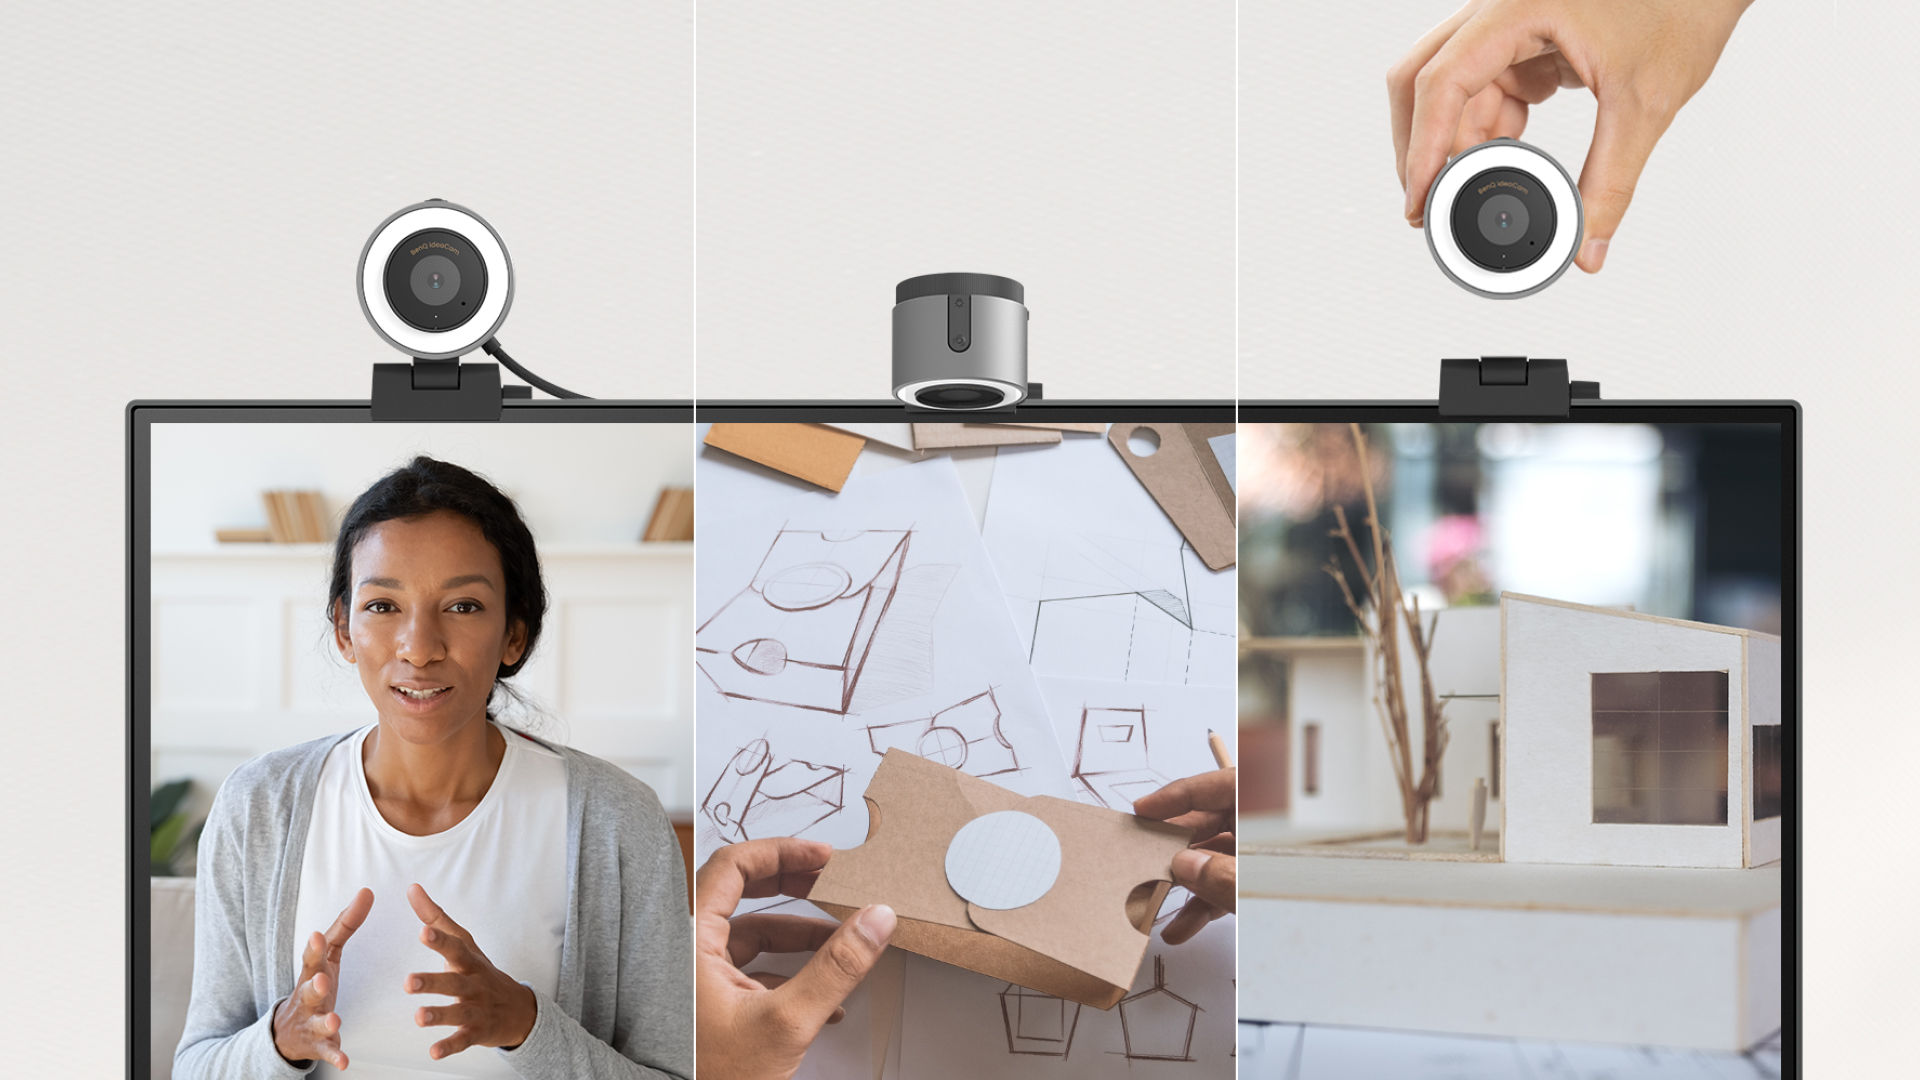 All-In-One Webcam Seamless Switch to Document Camera 